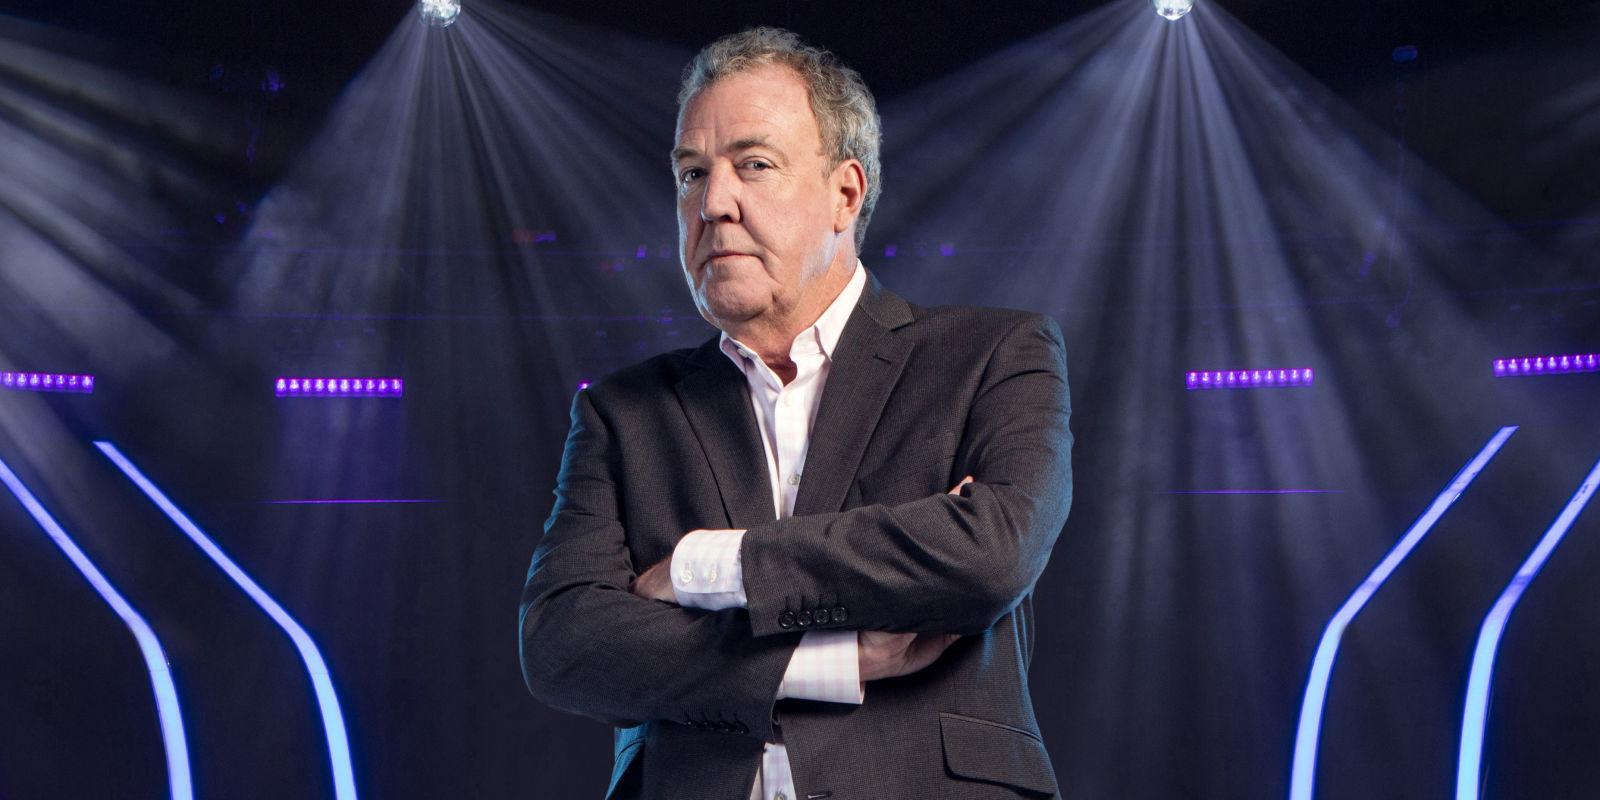 The introduction of an 'Ask the Host' lifeline means Clarkson can help out contestants